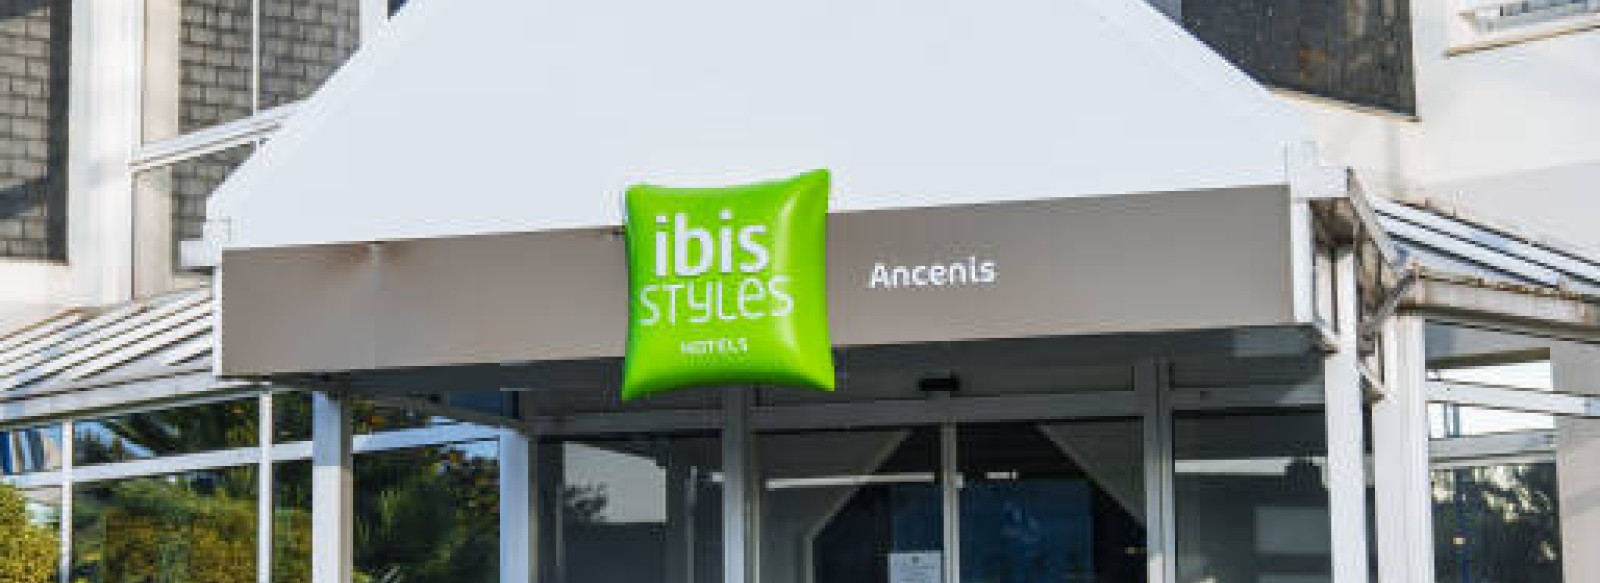 HOTEL IBIS STYLES ANCENIS CENTRE